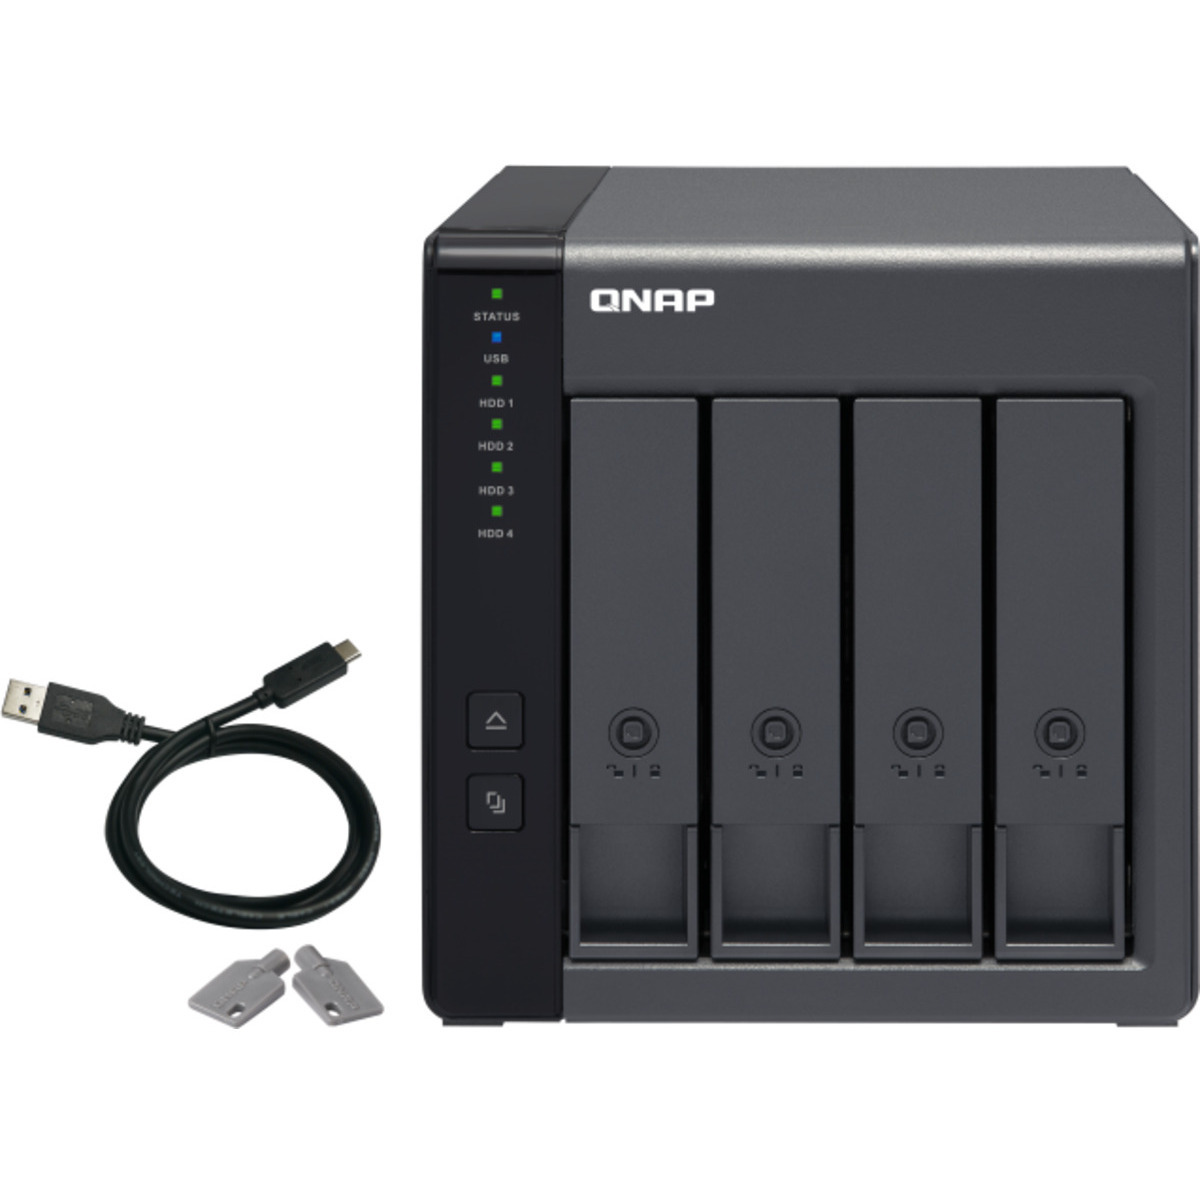 buy QNAP TR-004 External Expansion Drive Desktop Expansion Enclosure Burn-In Tested Configurations - nas headquarters buy network attached storage server device das new raid-5 free shipping usa christmas new year holiday sale TR-004 External Expansion Drive